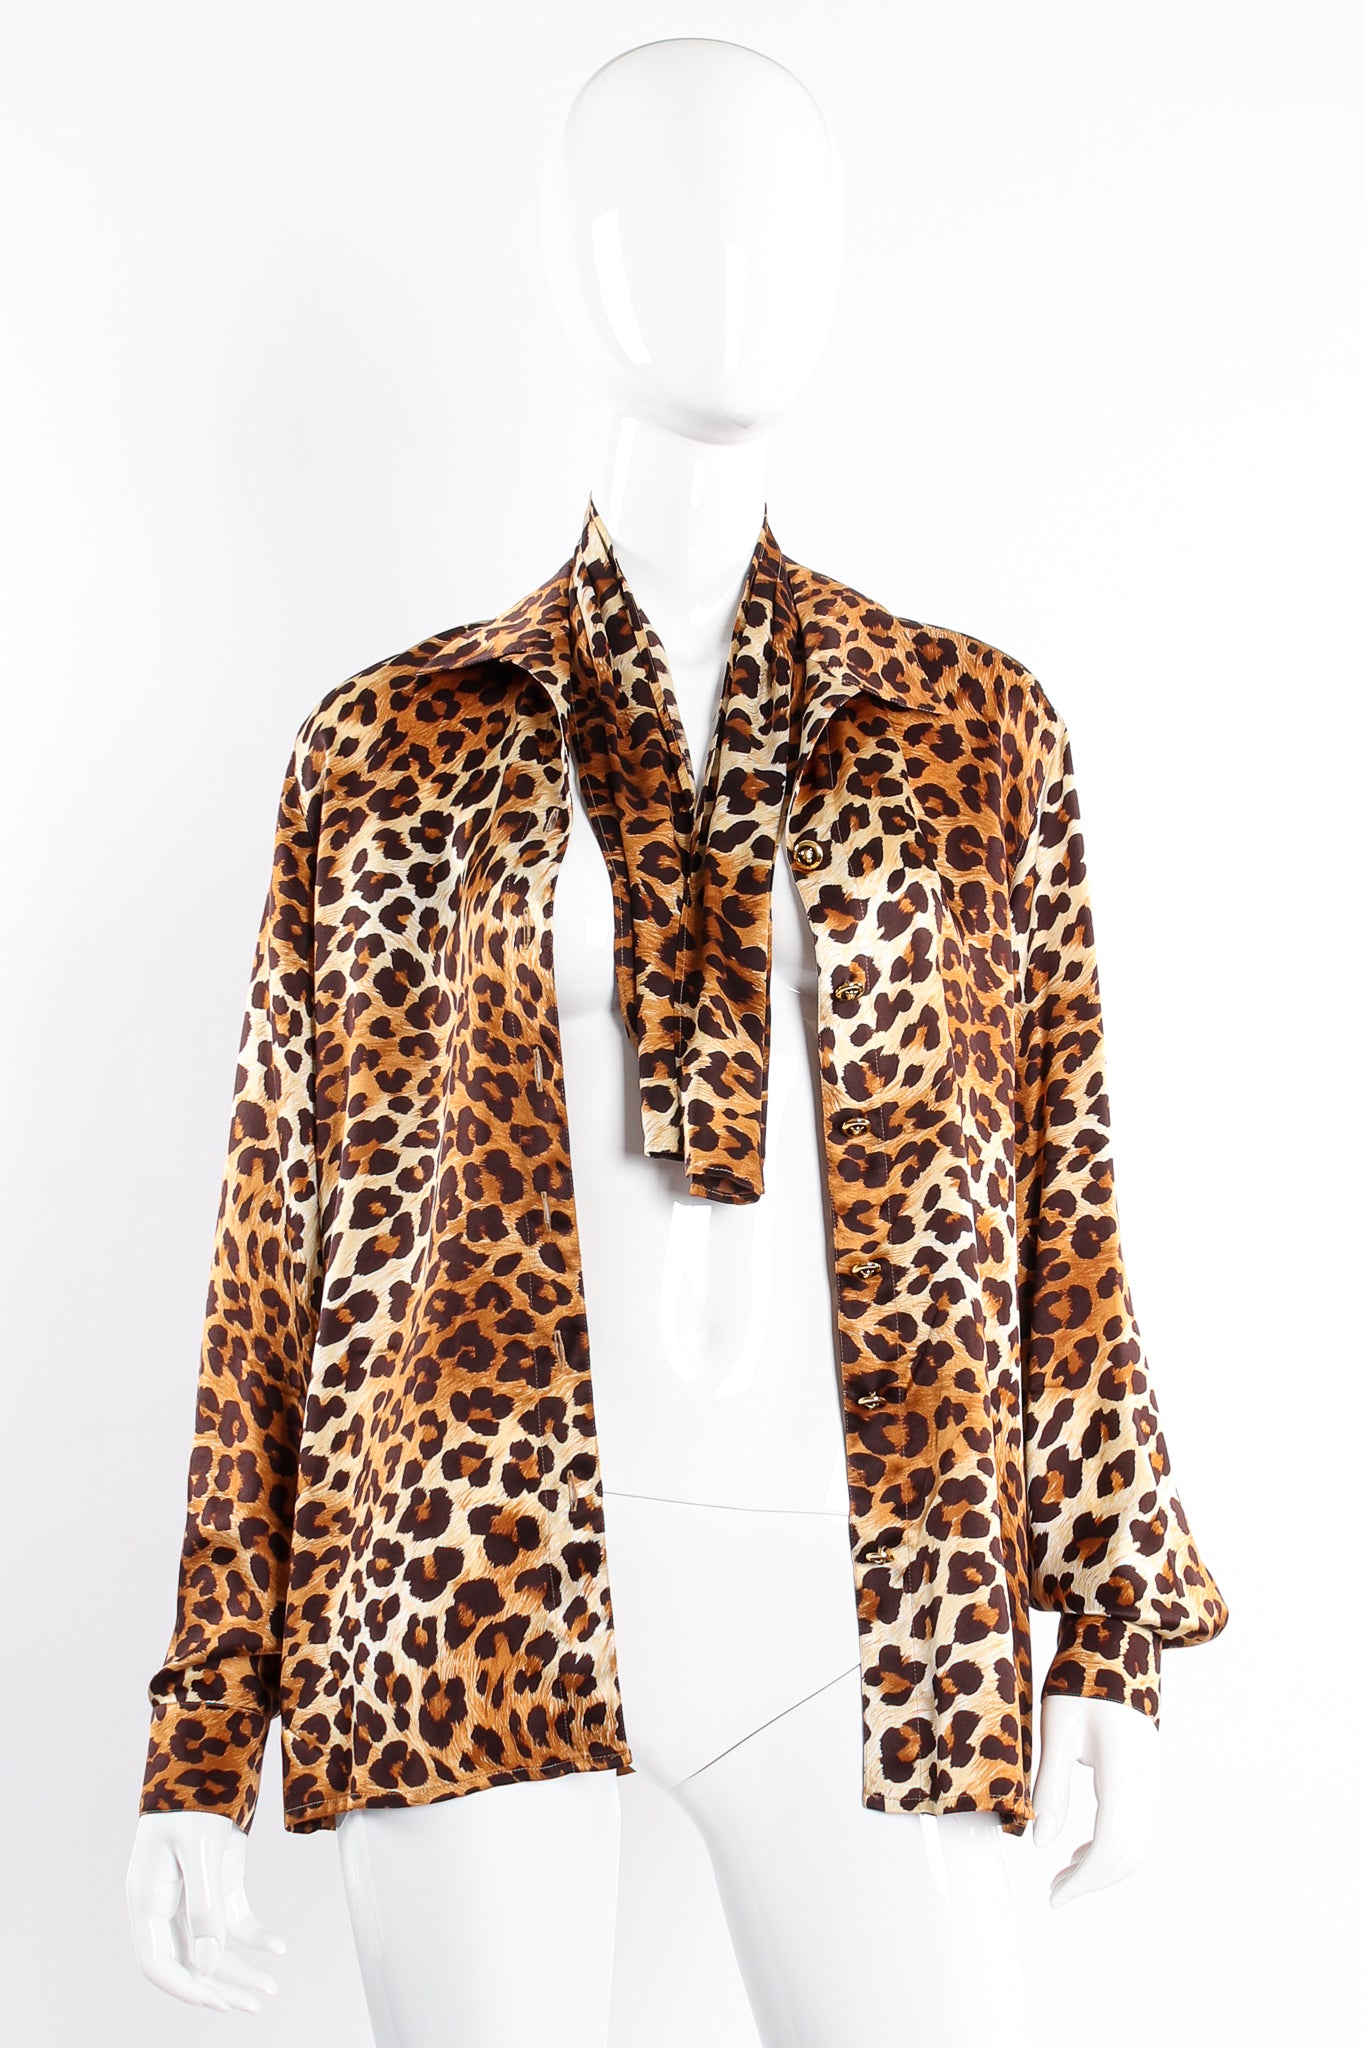 Vintage Escada Leopard Print Shirt & Scarf on Mannequin open at Recess Los Angeles